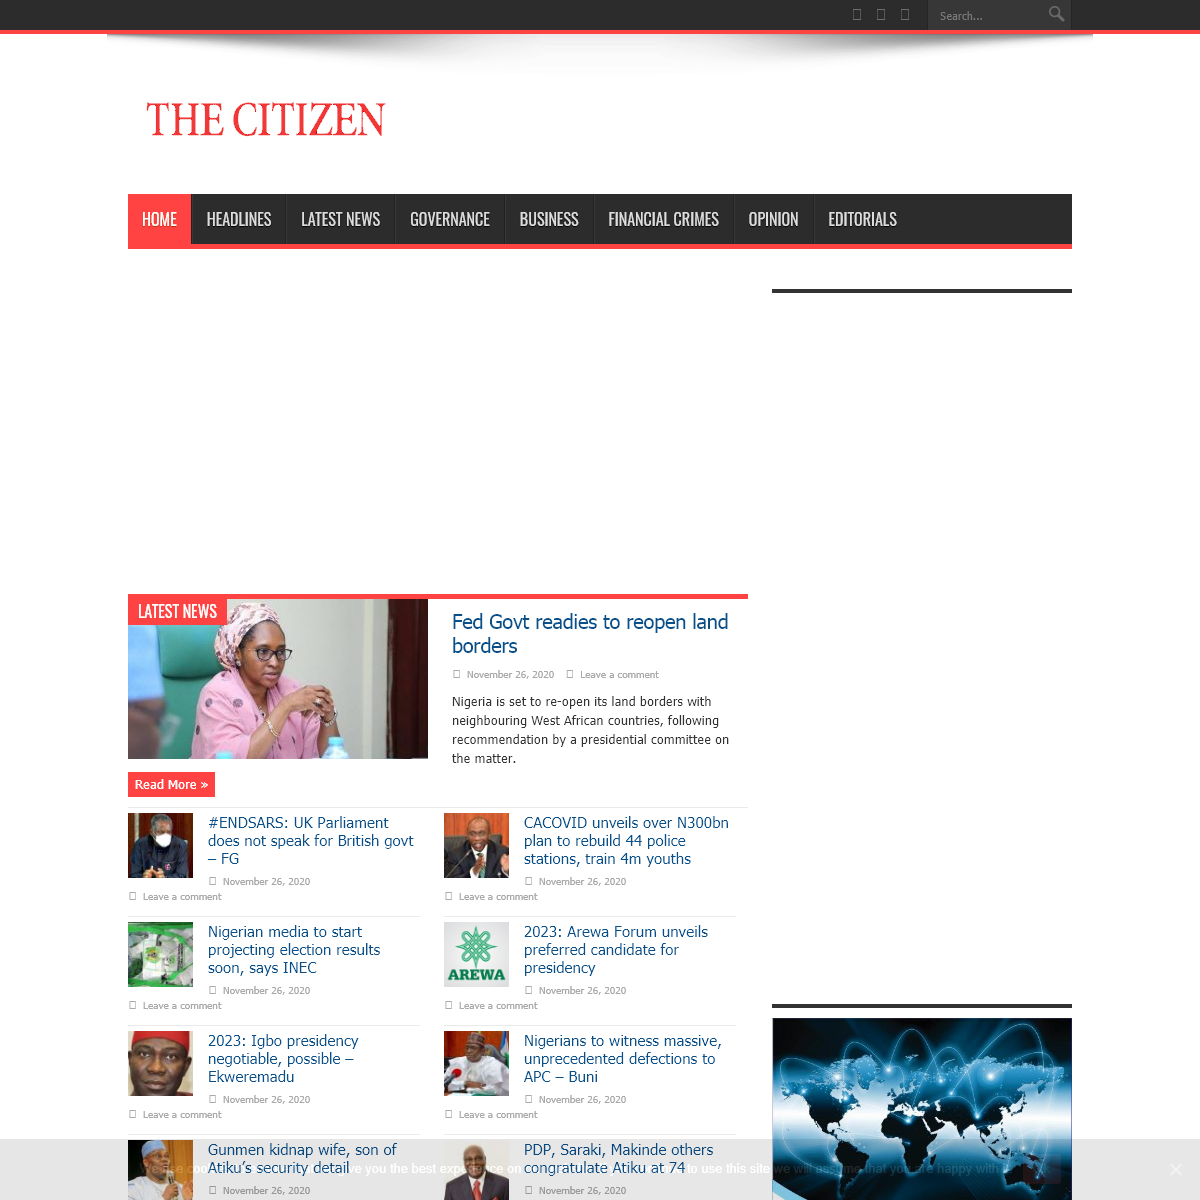 A complete backup of thecitizenng.com